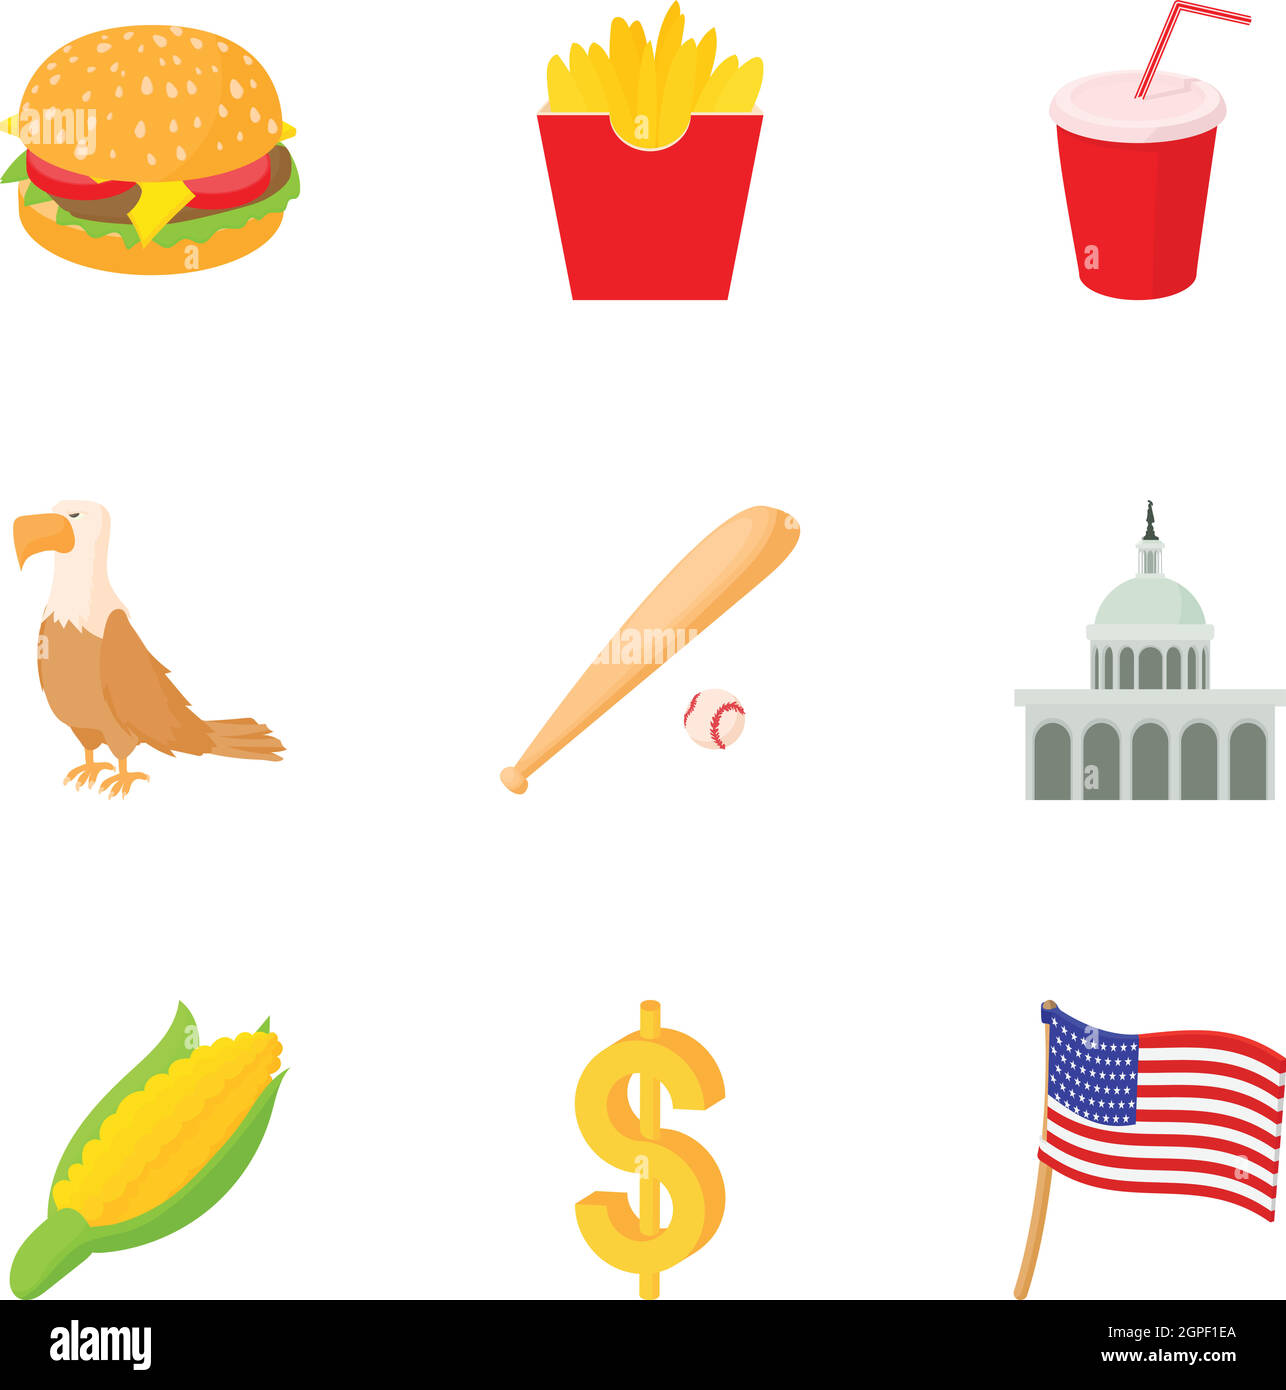 State of USA icons set, cartoon style Stock Vector